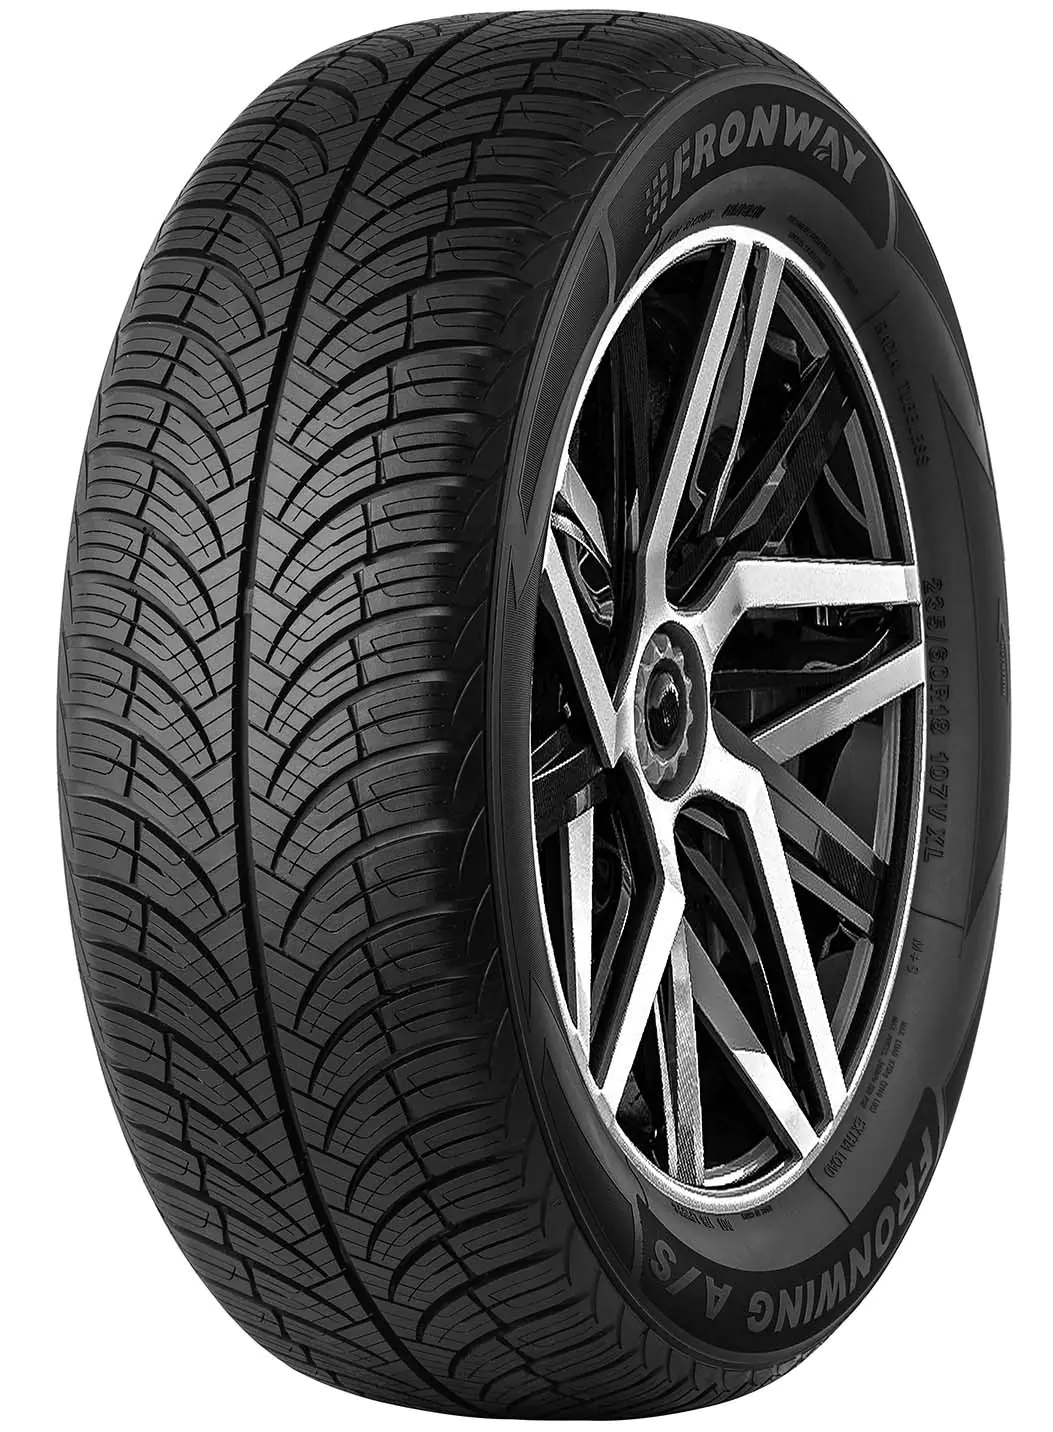 Fronway Fronway 225/55 R19 99V FRONWING A/S pneumatici nuovi All Season 